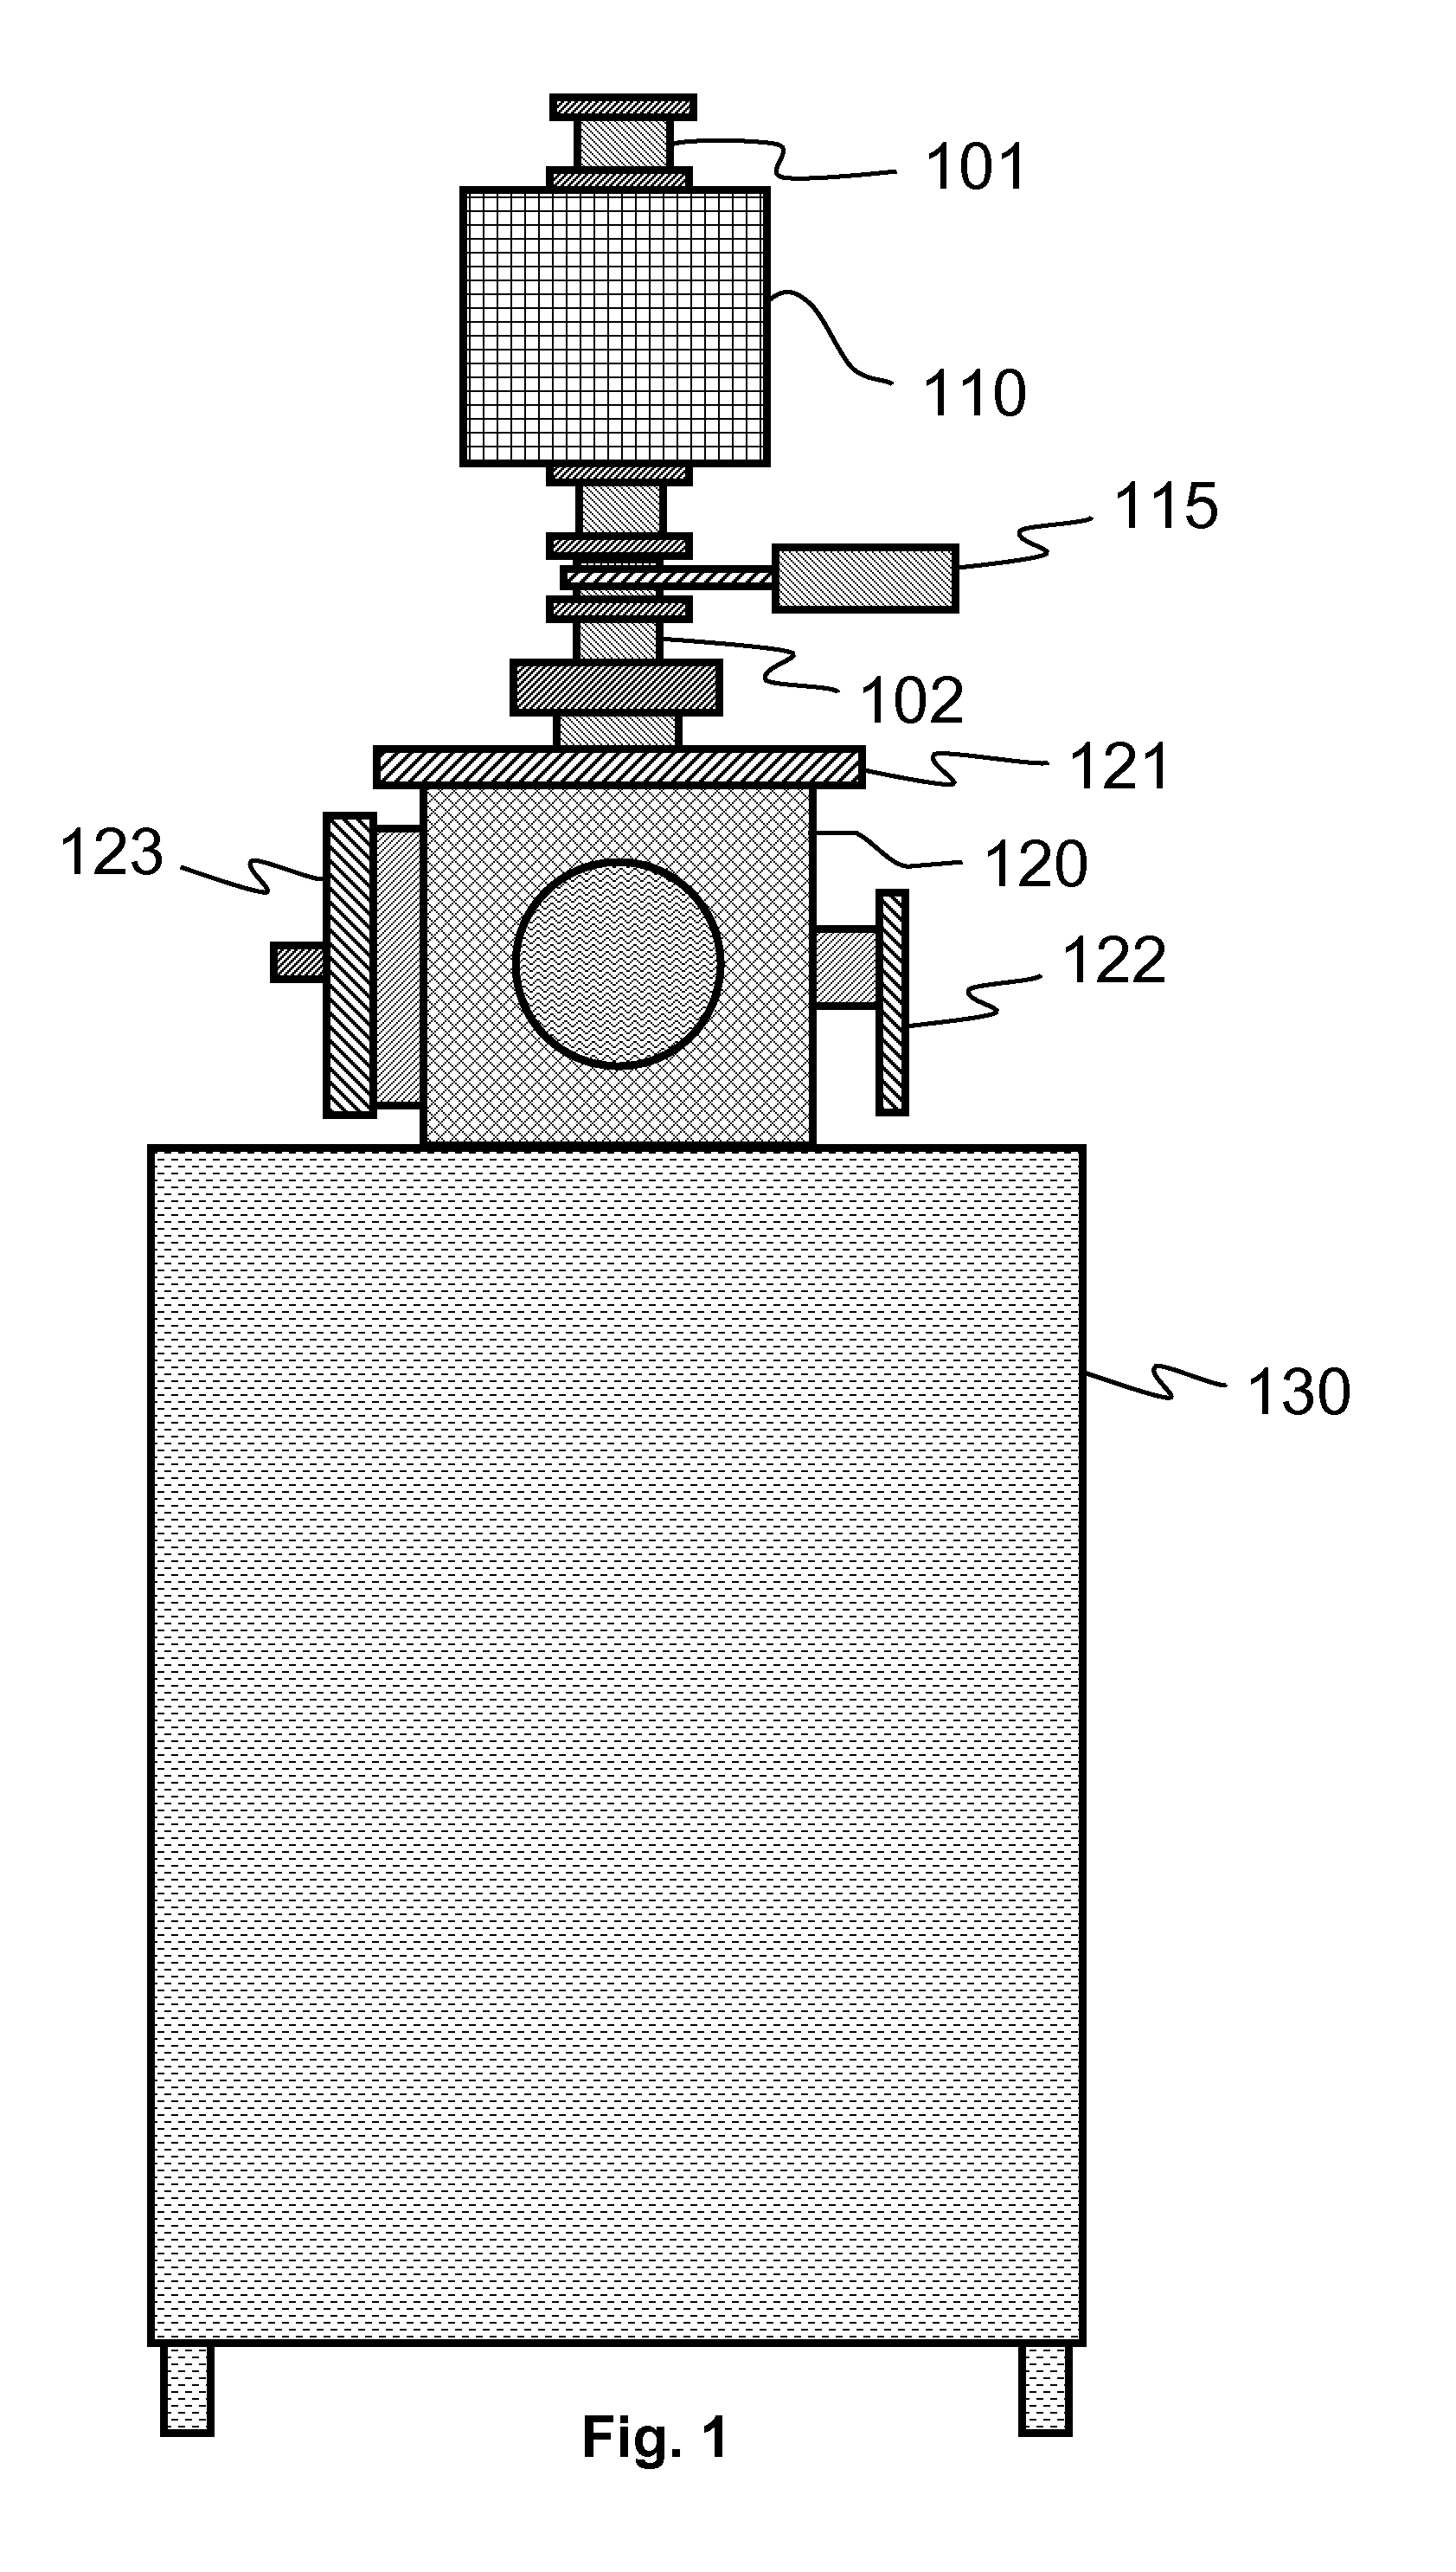 Atomic layer deposition with plasma source